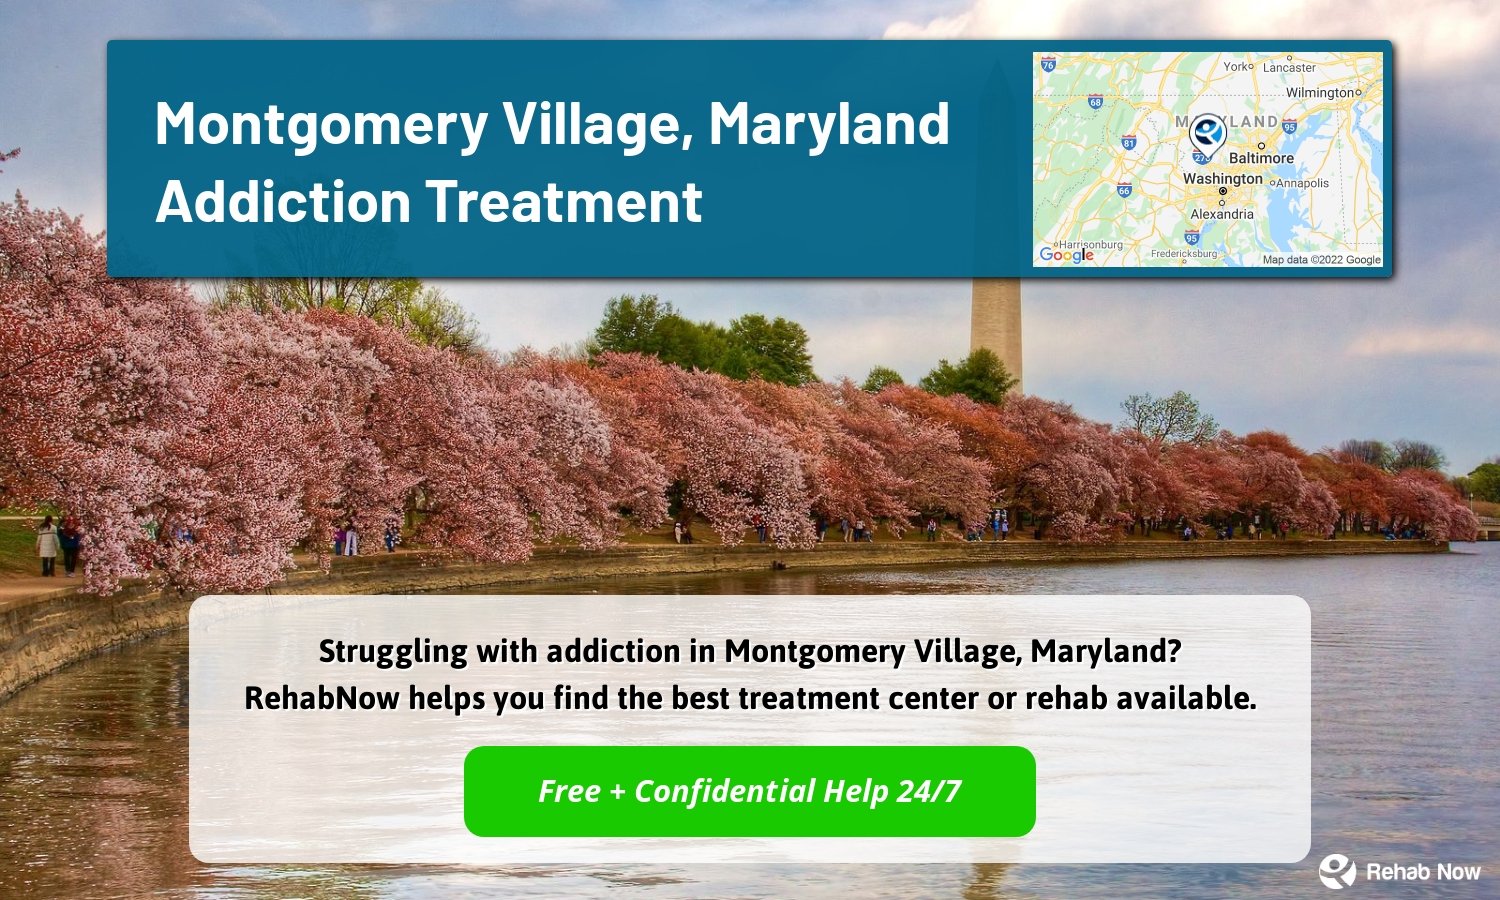 Struggling with addiction in Montgomery Village, Maryland? RehabNow helps you find the best treatment center or rehab available.